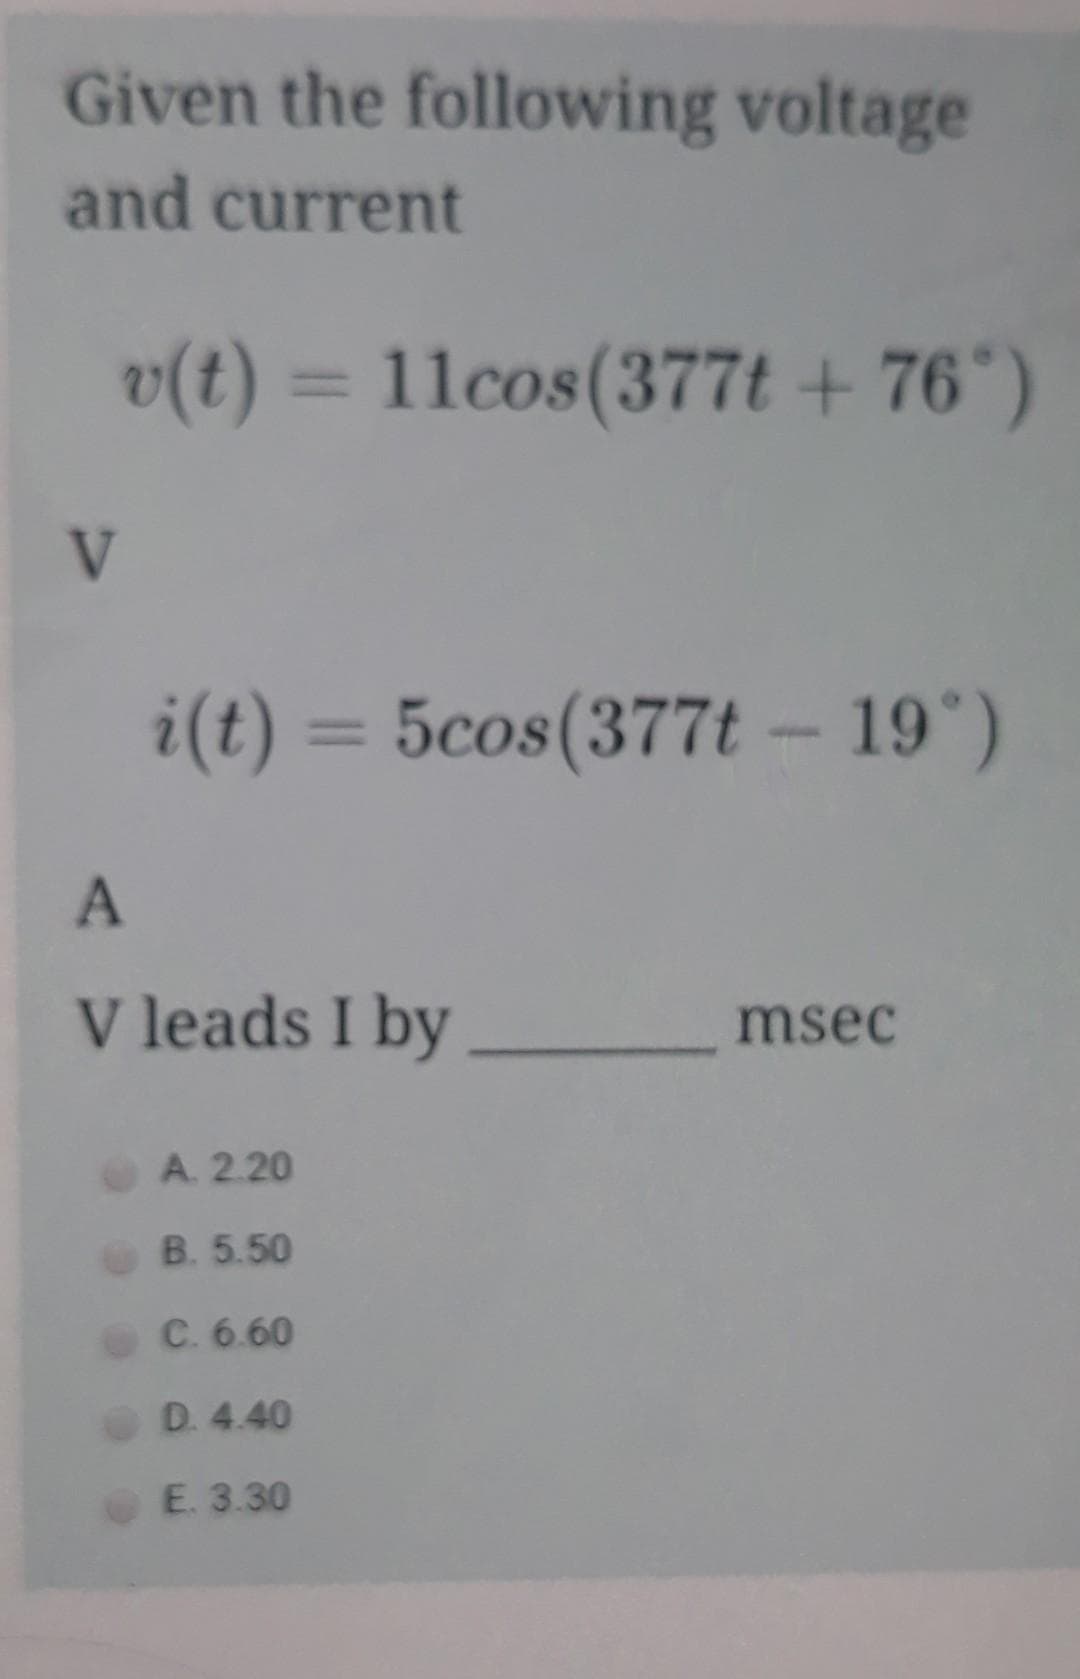 Given the following voltage
and current
v(t) = 11cos(377t + 76*)
V
i(t) = 5cos(377t - 19)
%3D
V leads I by
msec
A. 2.20
B. 5.50
C. 6.60
D. 4.40
E. 3.30
